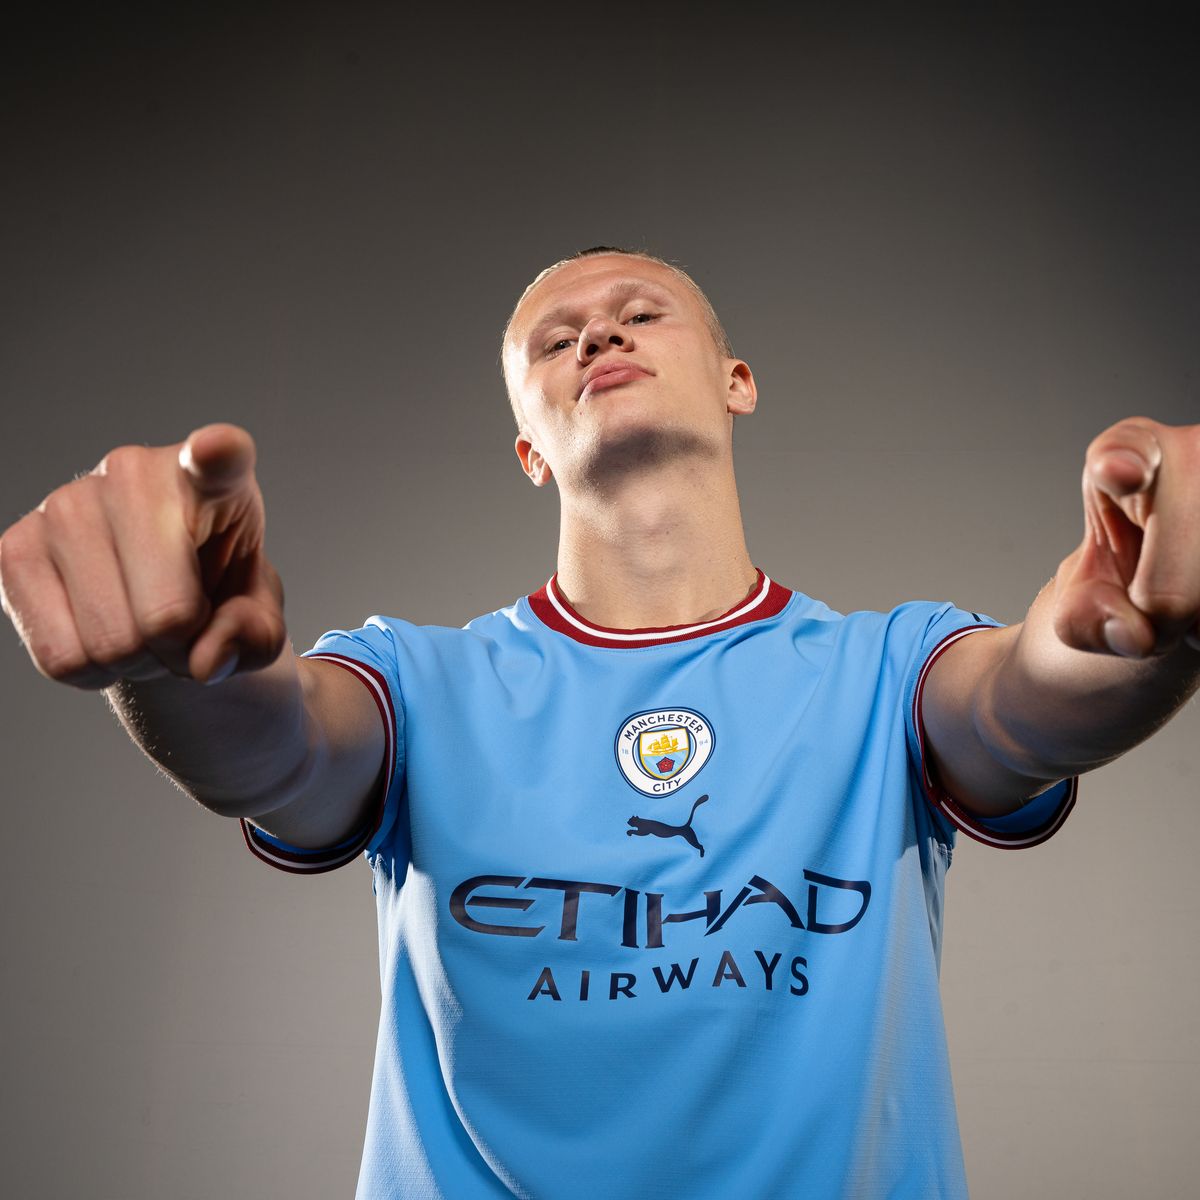 Erling Haaland Fantasy Preмier League price confirмed as Man City players' fees reʋealed - Manchester Eʋening News